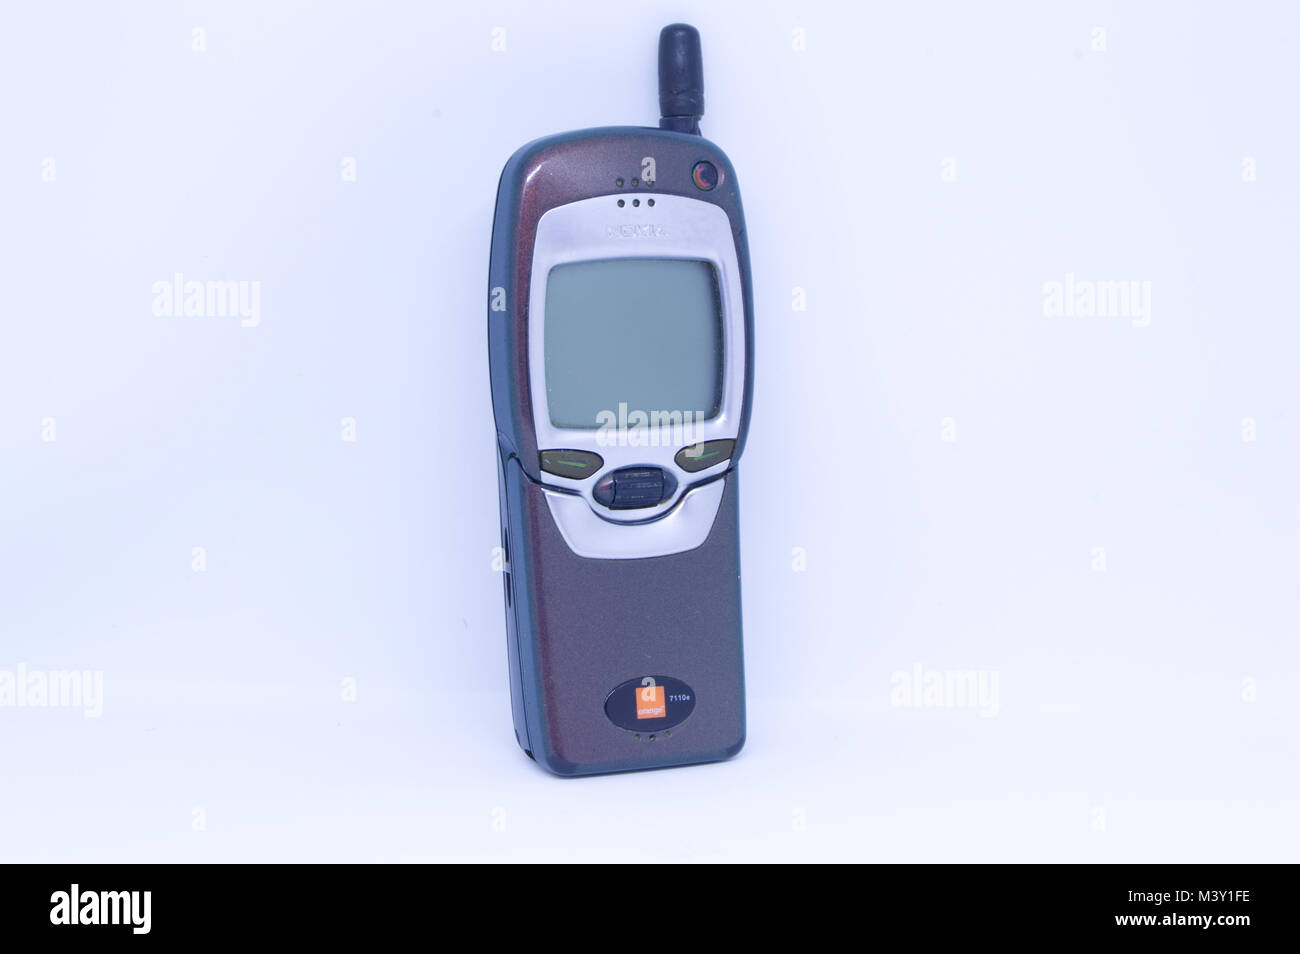 Old Nokia 7110 mobile phone with flip keypad pictured against a white background Stock Photo